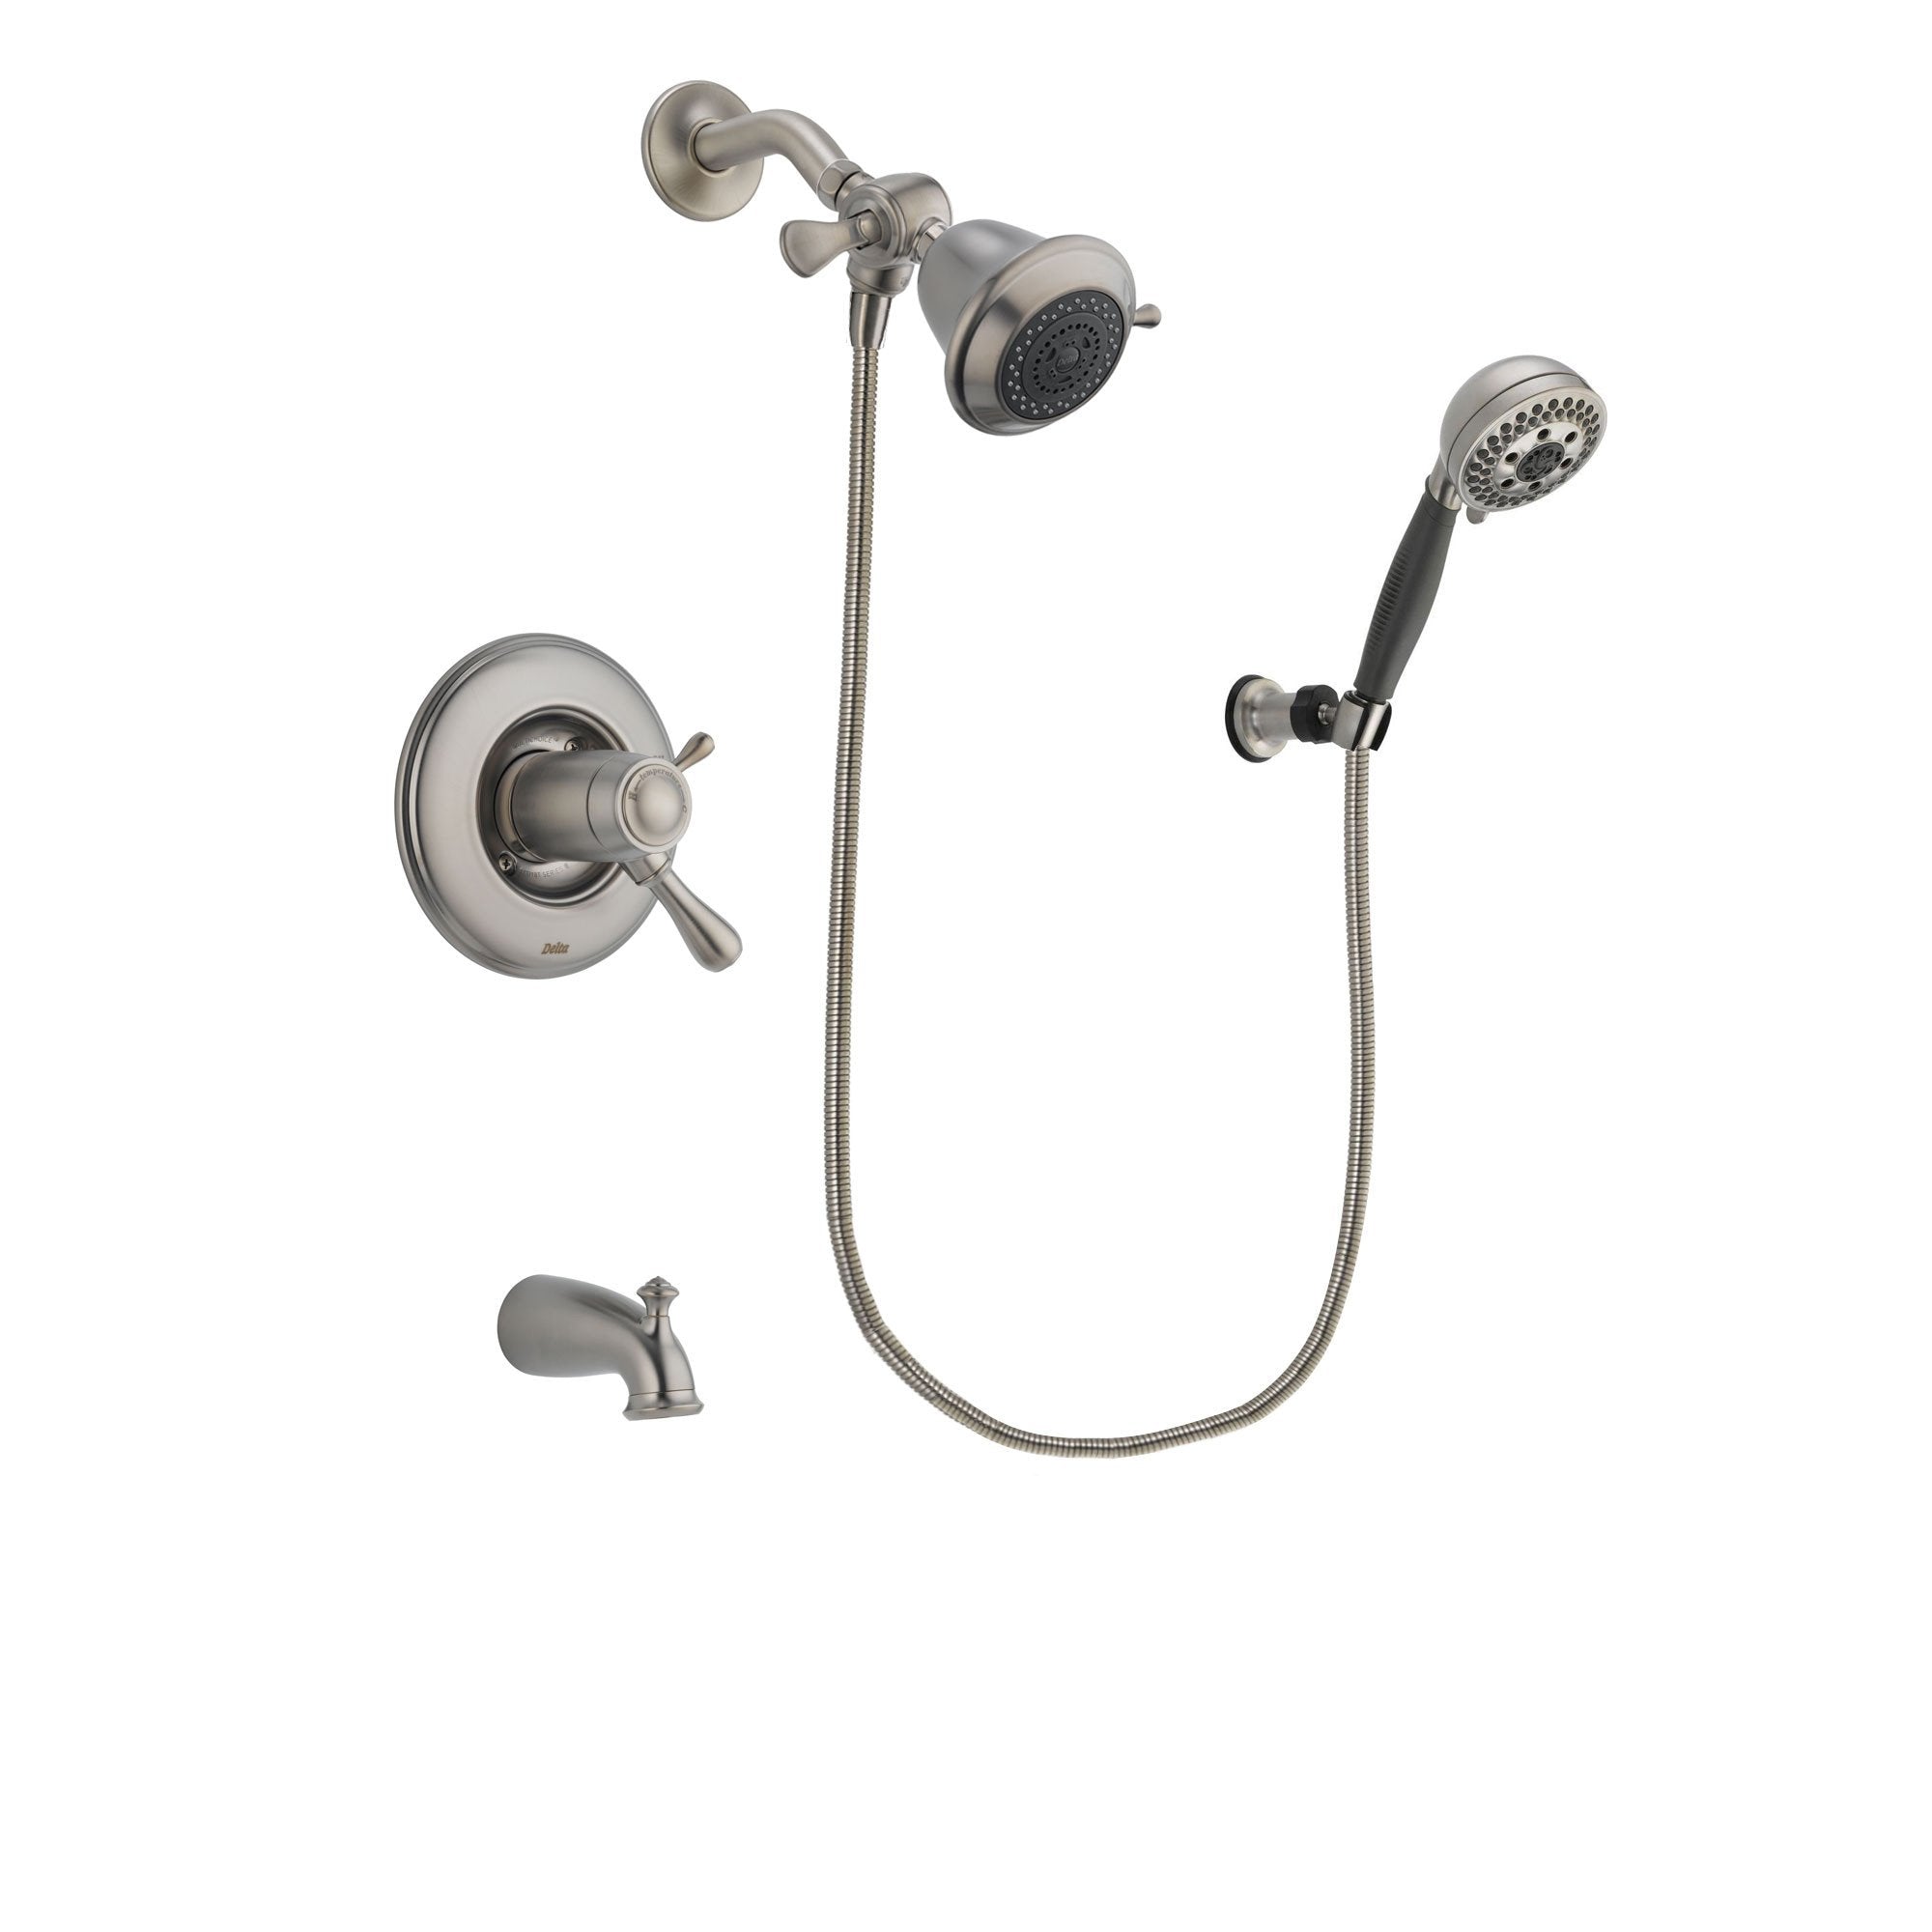 Delta Leland Stainless Steel Finish Thermostatic Tub and Shower Faucet System Package with Shower Head and 5-Setting Wall Mount Personal Handheld Shower Includes Rough-in Valve and Tub Spout DSP1925V